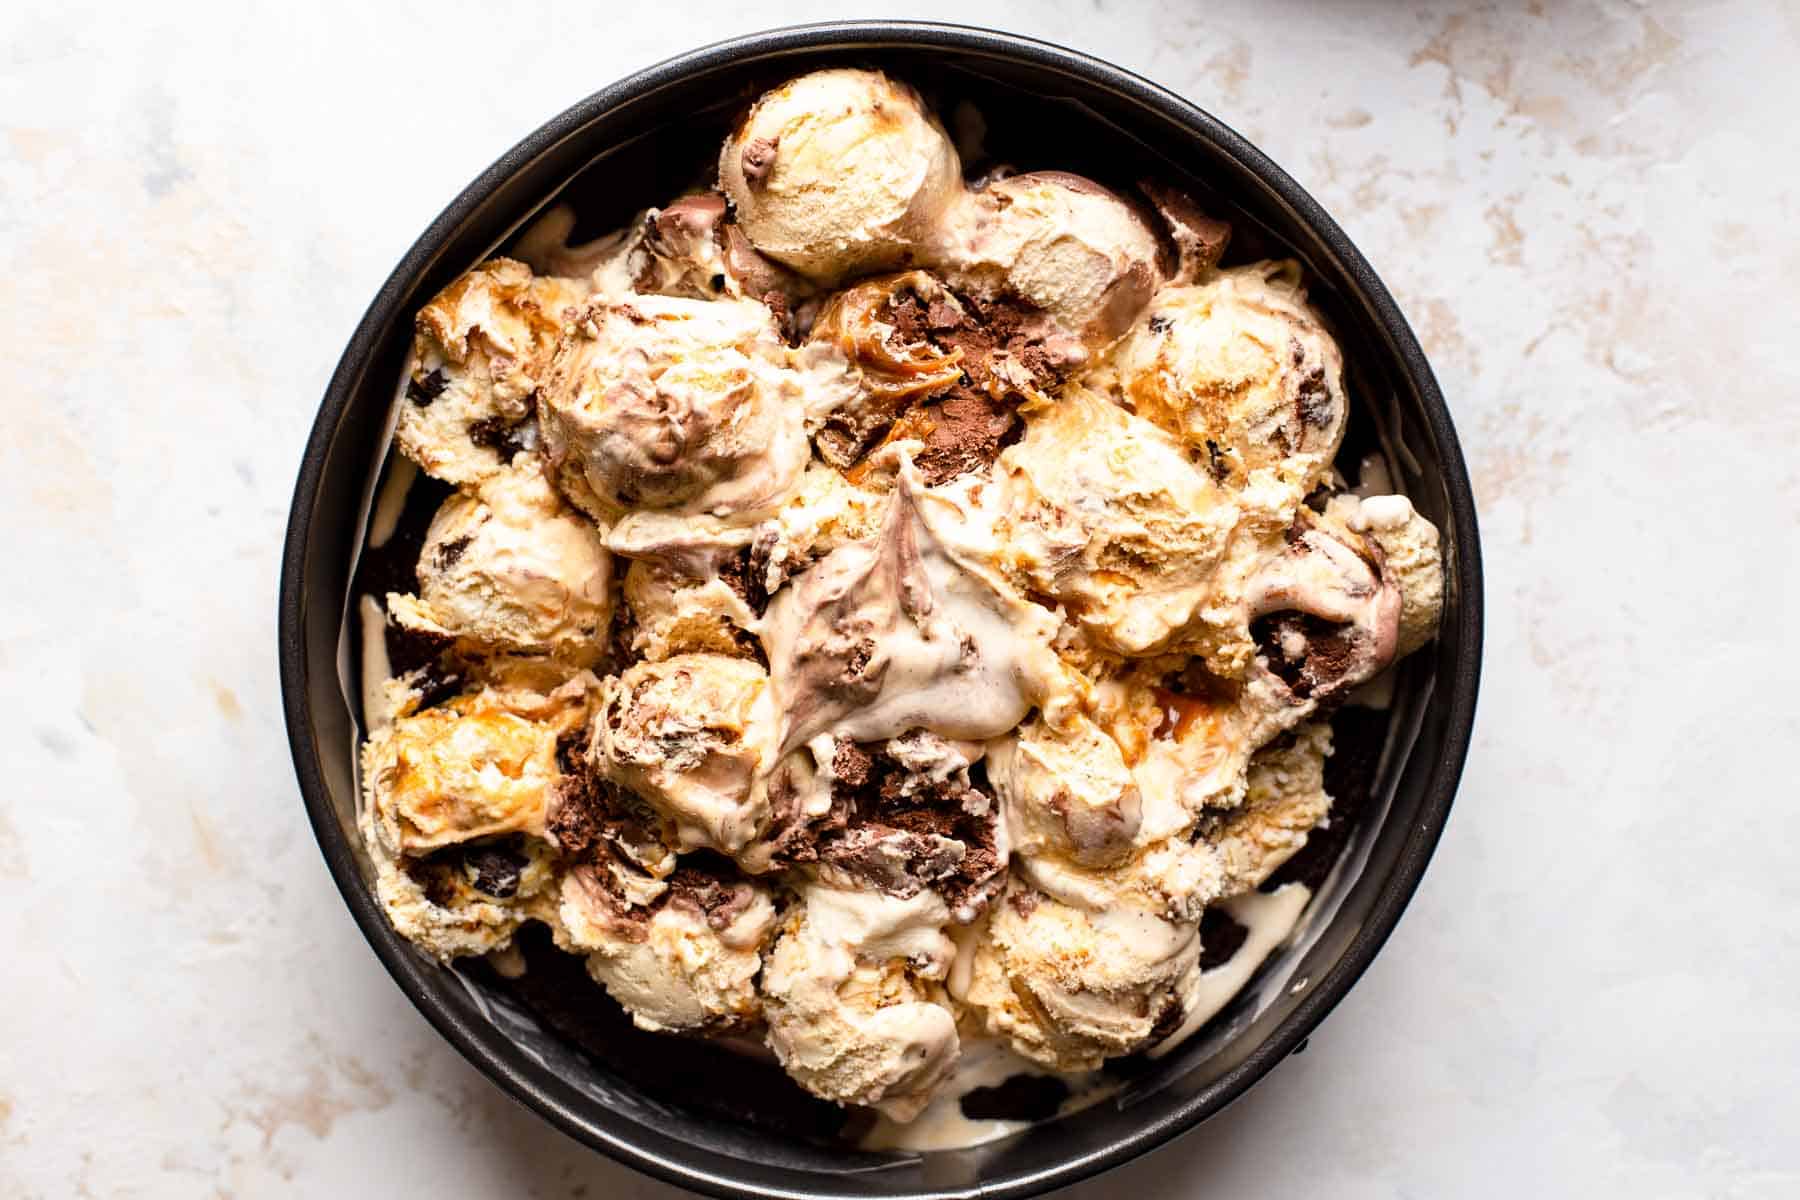 scoops of ice cream in a spring form pan